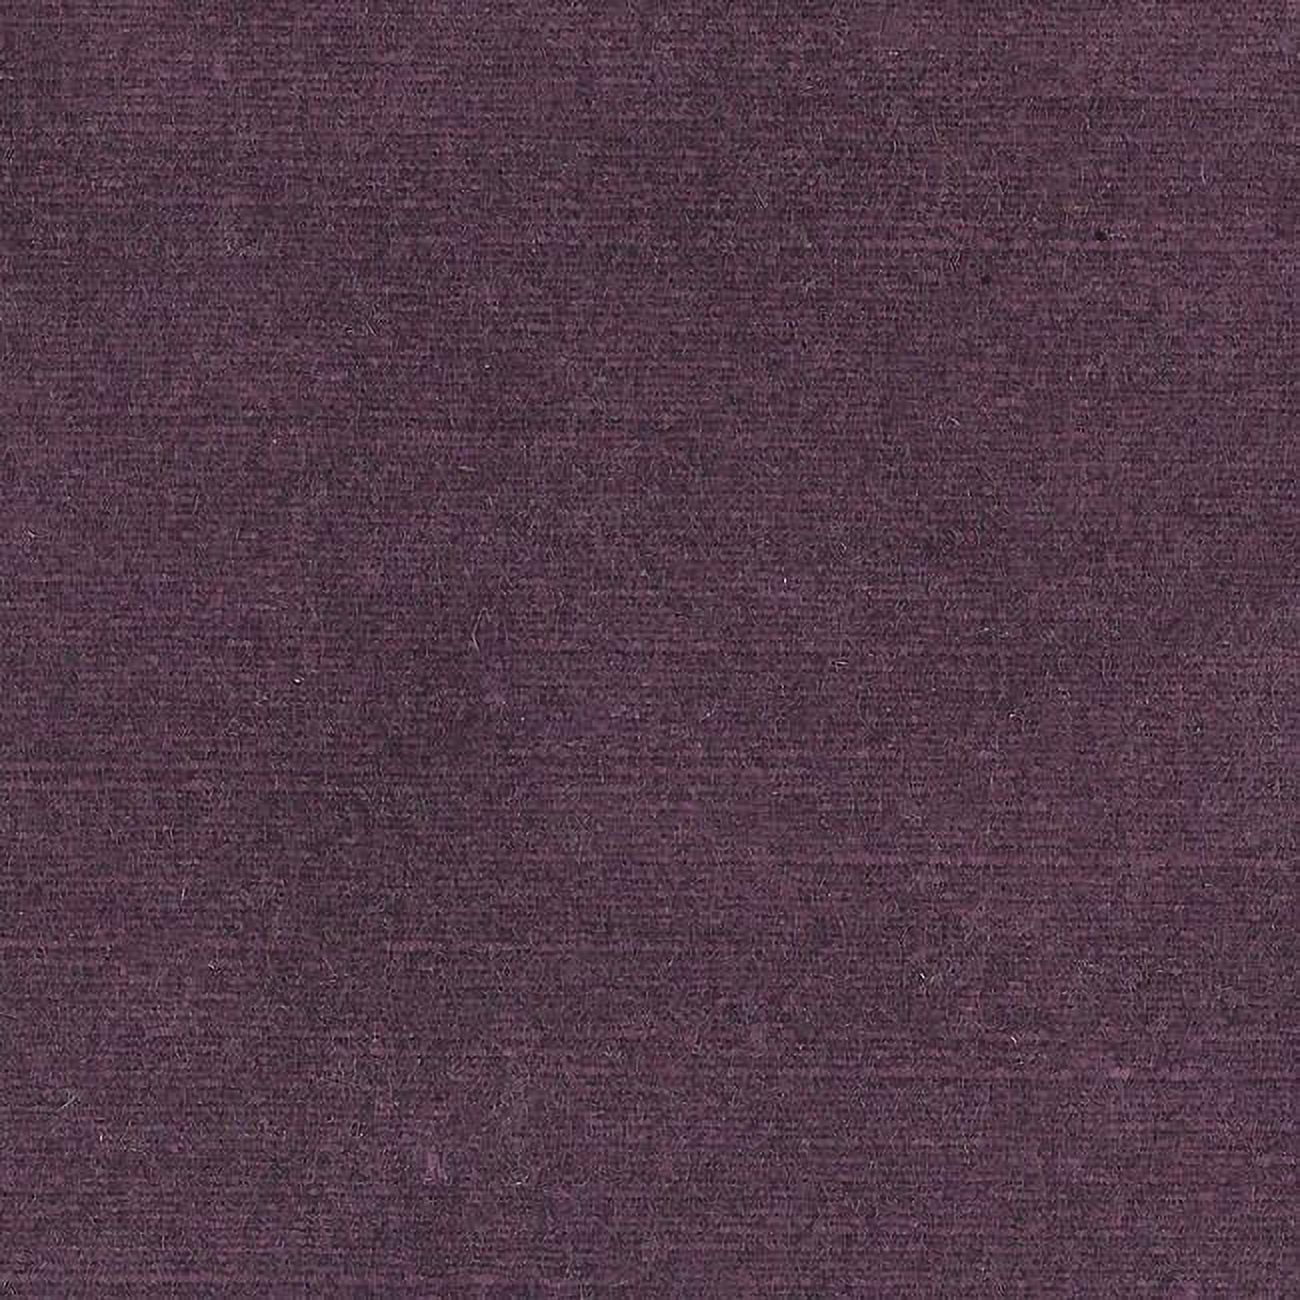 Picture of American Silk 3252 55 in. Brussels Beautifuly Curated Velvet Fabric Cloth, Mulberry